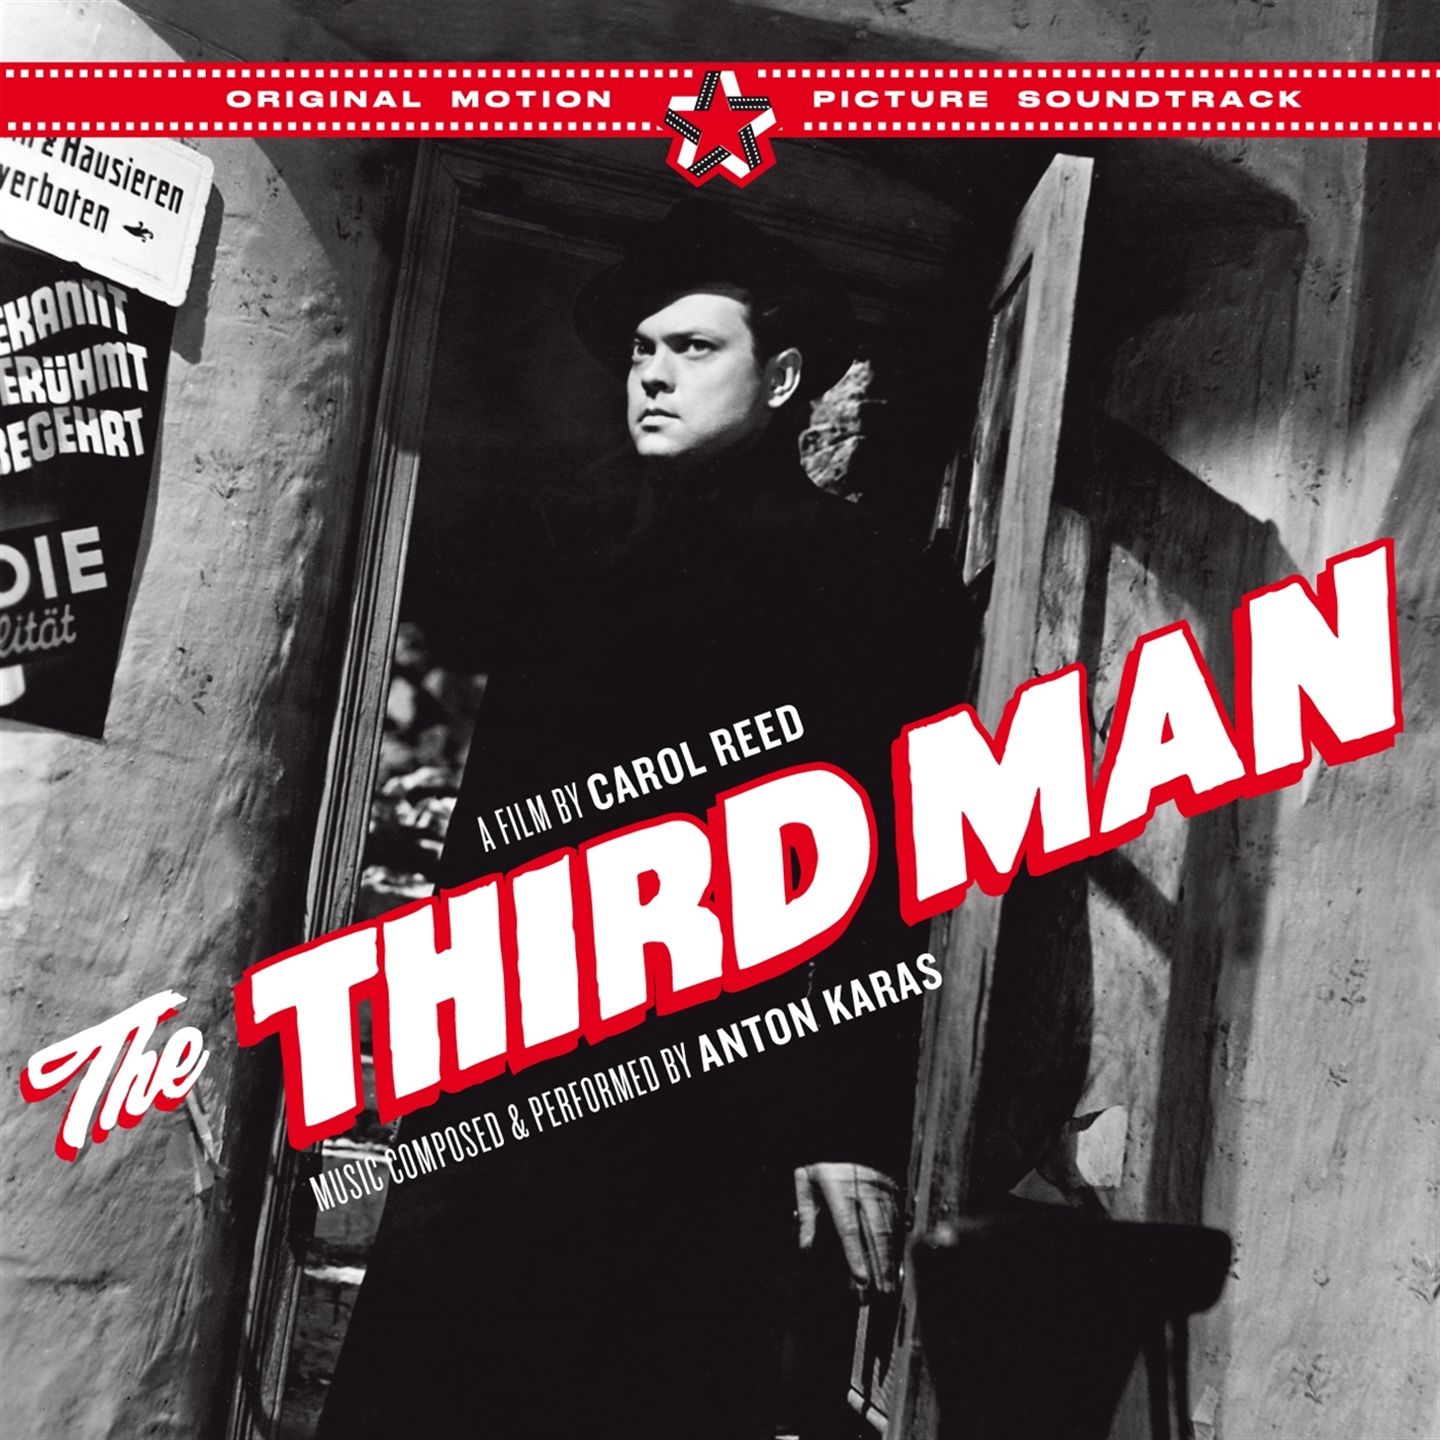 THE THIRD MAN (THE CLASSIC SOUNDTRACK + THE STUDIO RECORDINGS)